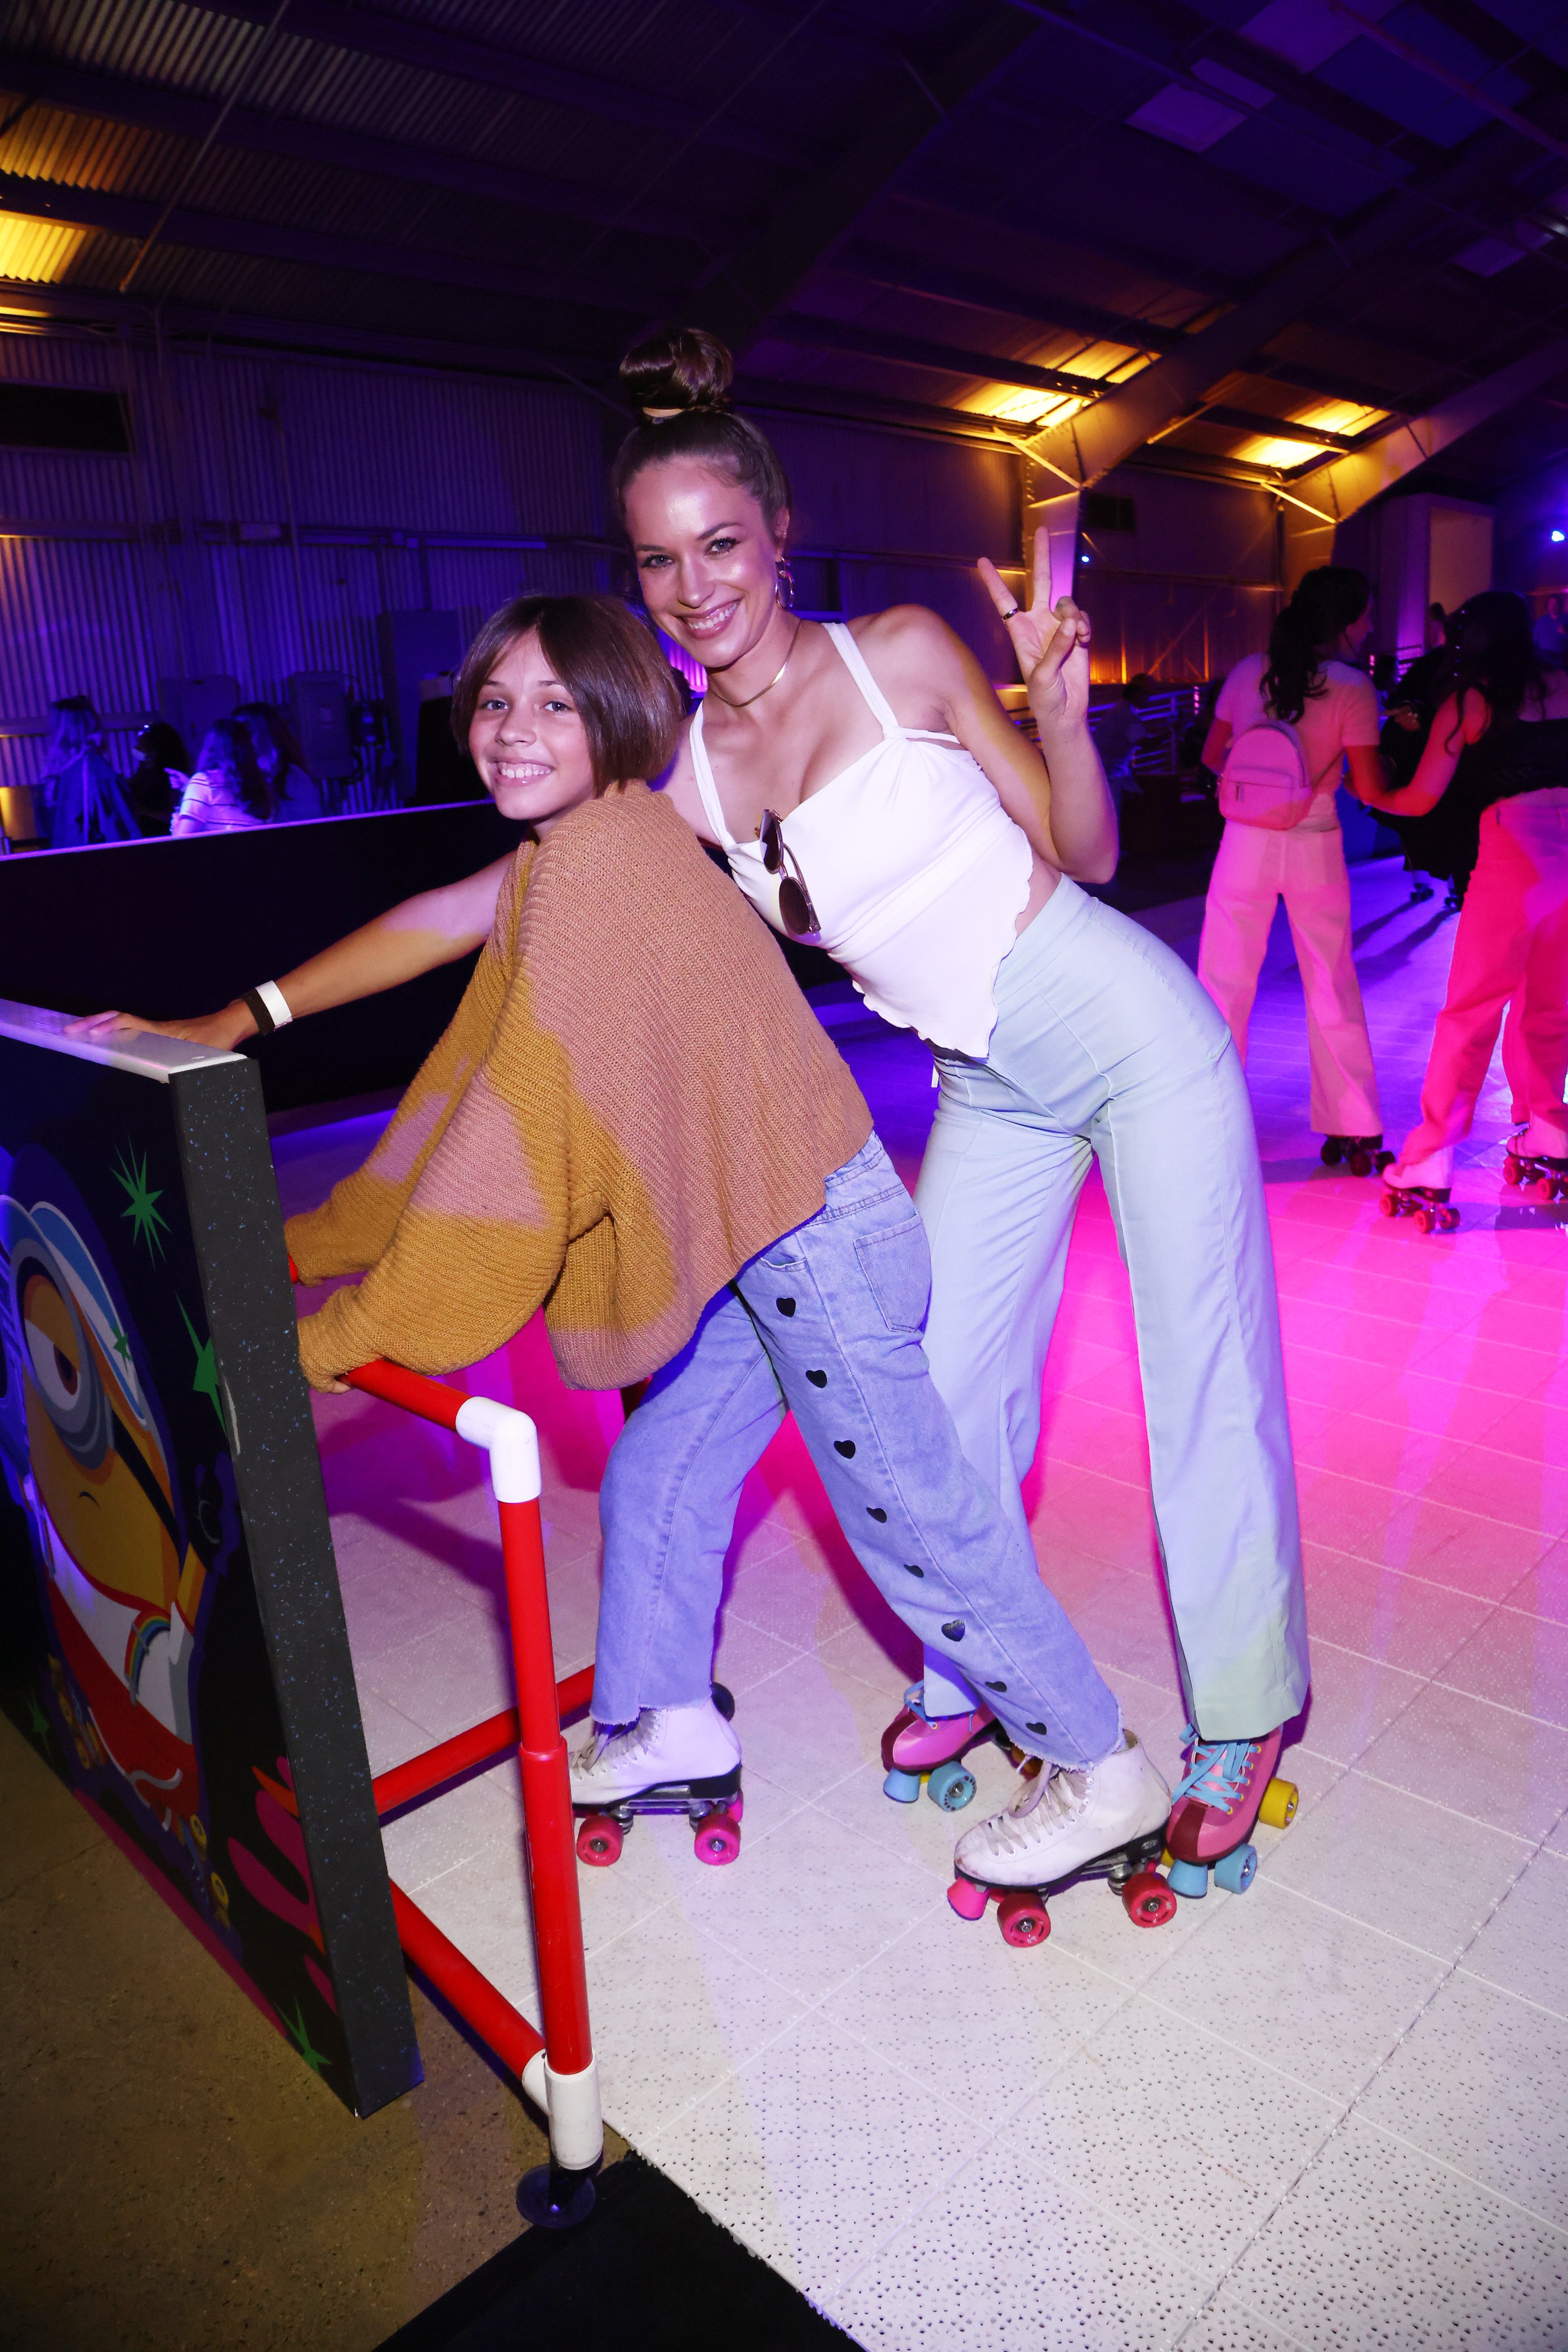 Alexis and Kai Knapp attend the Skate Experience in Minionwood to celebrate the release of "Minions: The Rise Of Gru" at Milk Studios Los Angeles on June 24, 2022 in Los Angeles, California. | Source: Getty Images